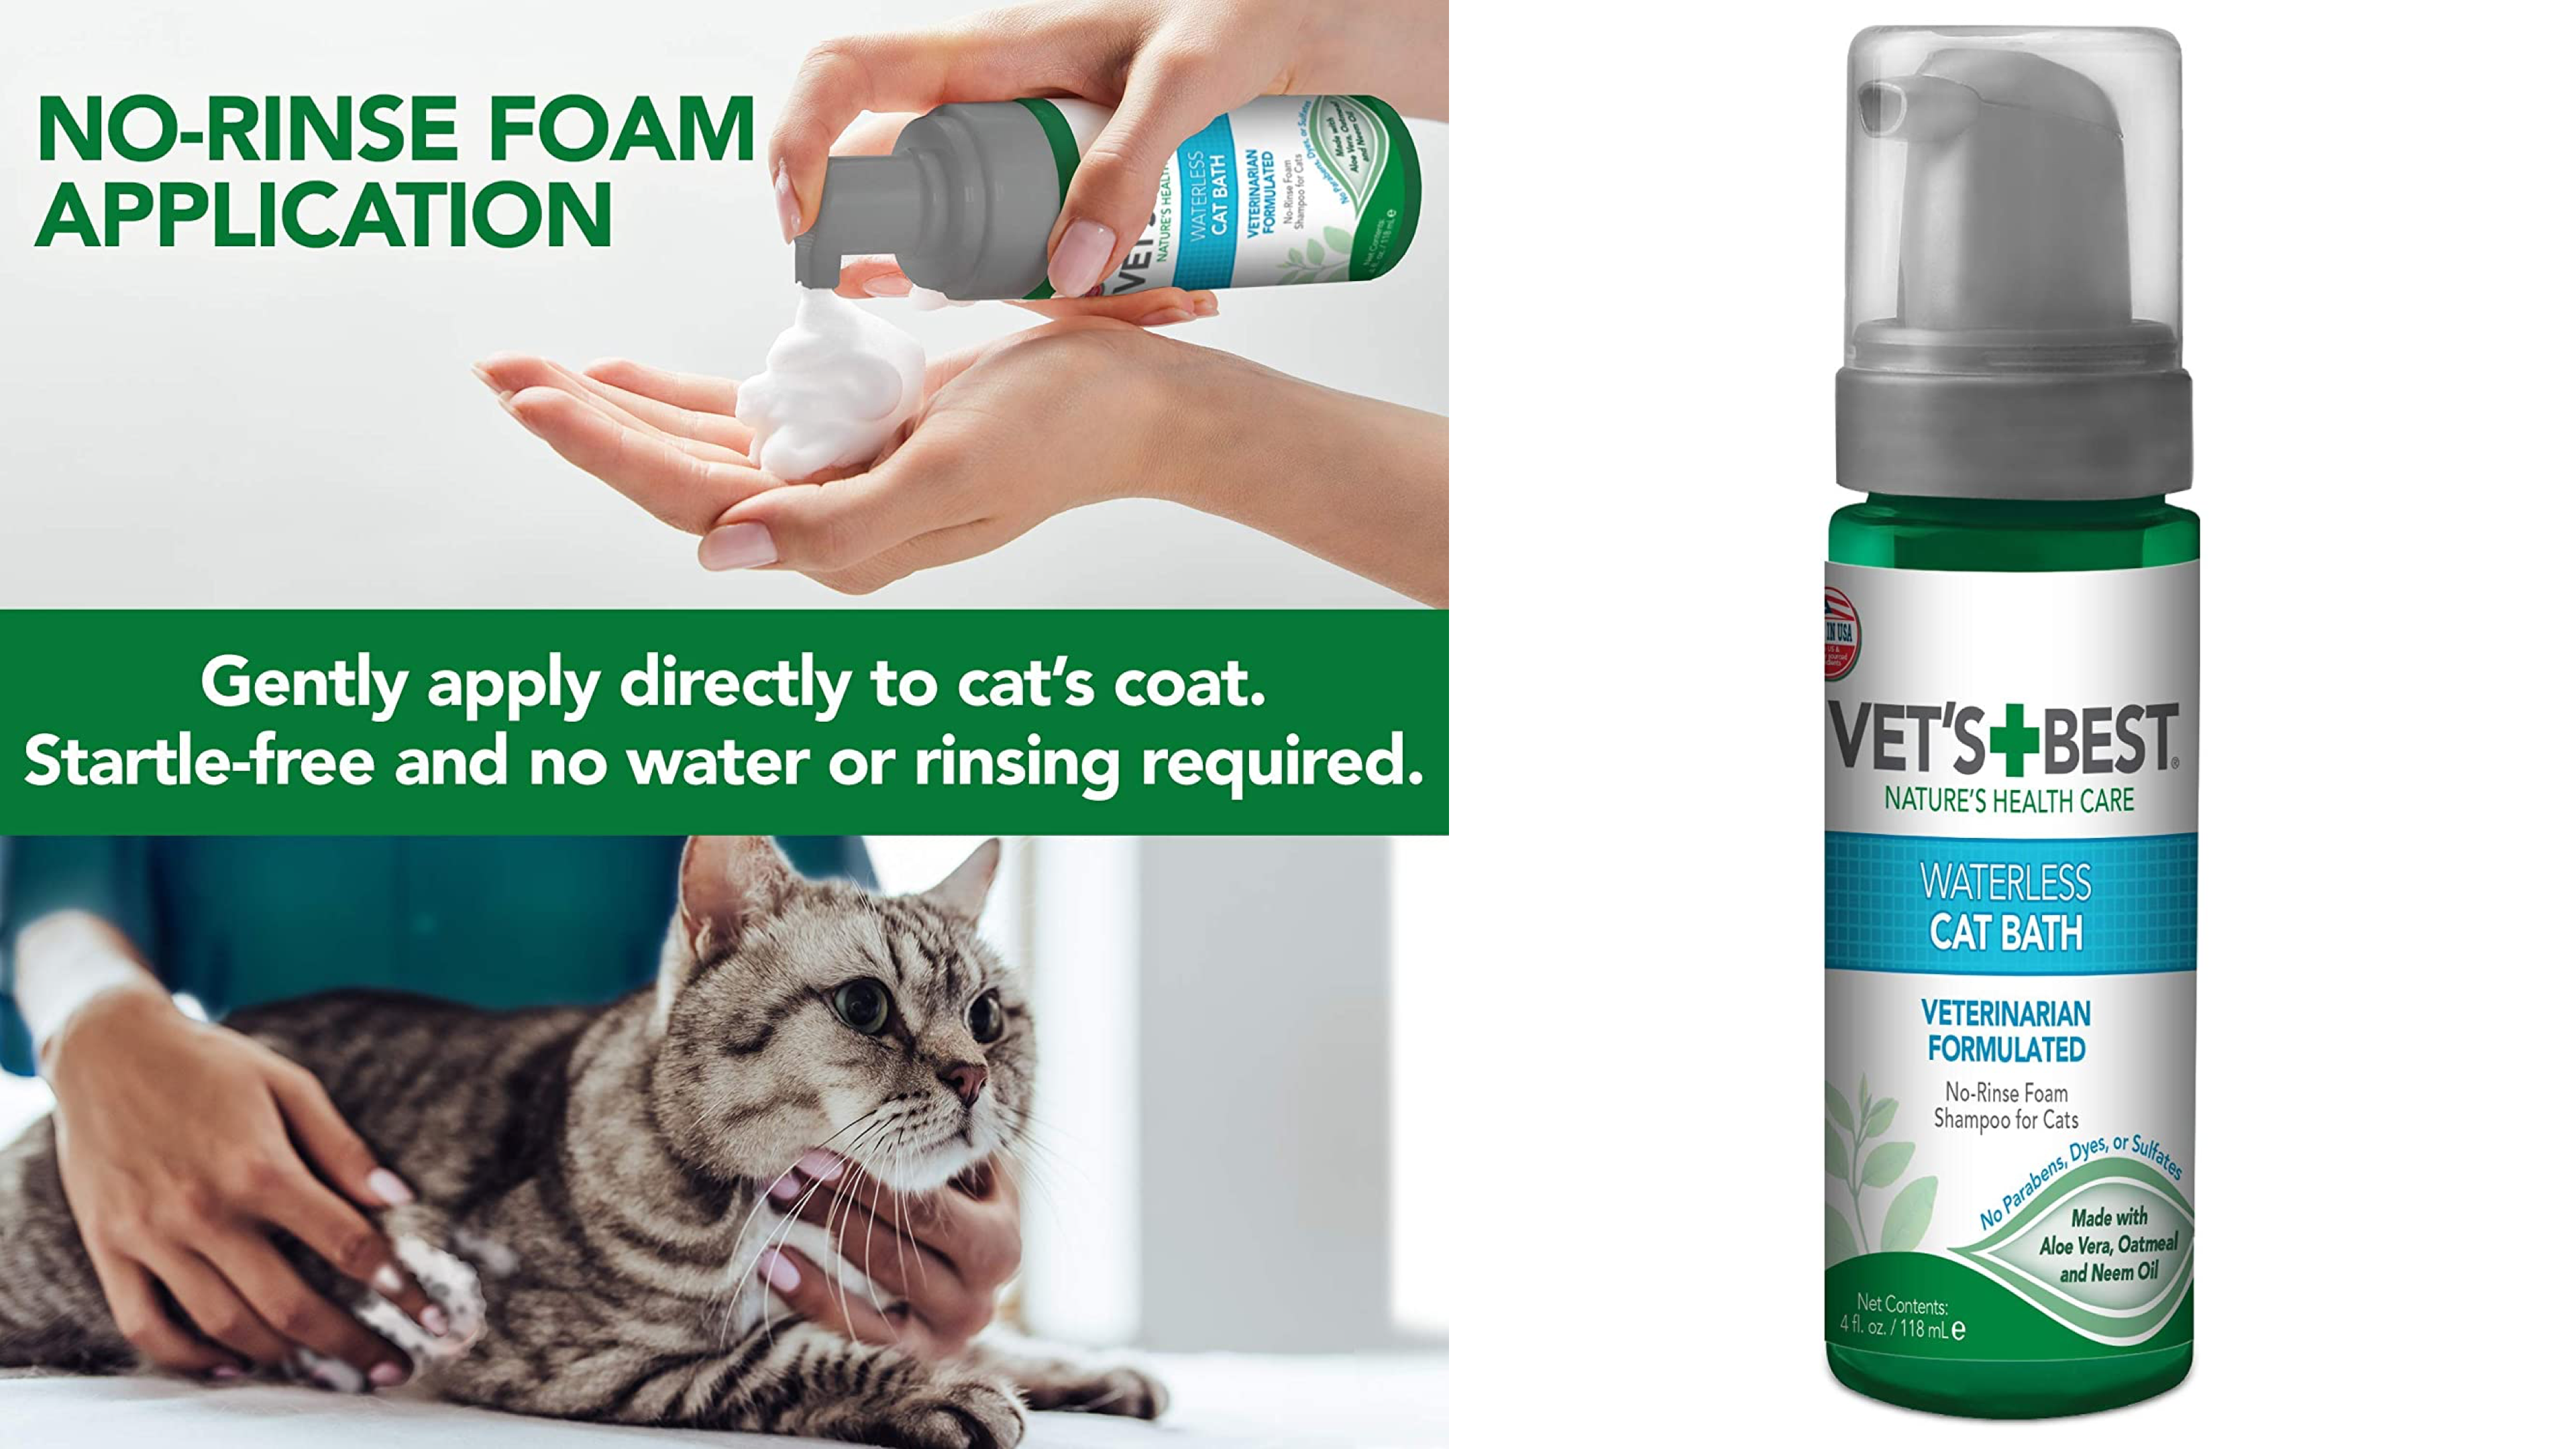 dry shampoo for cats, no water bath for cats who hate water